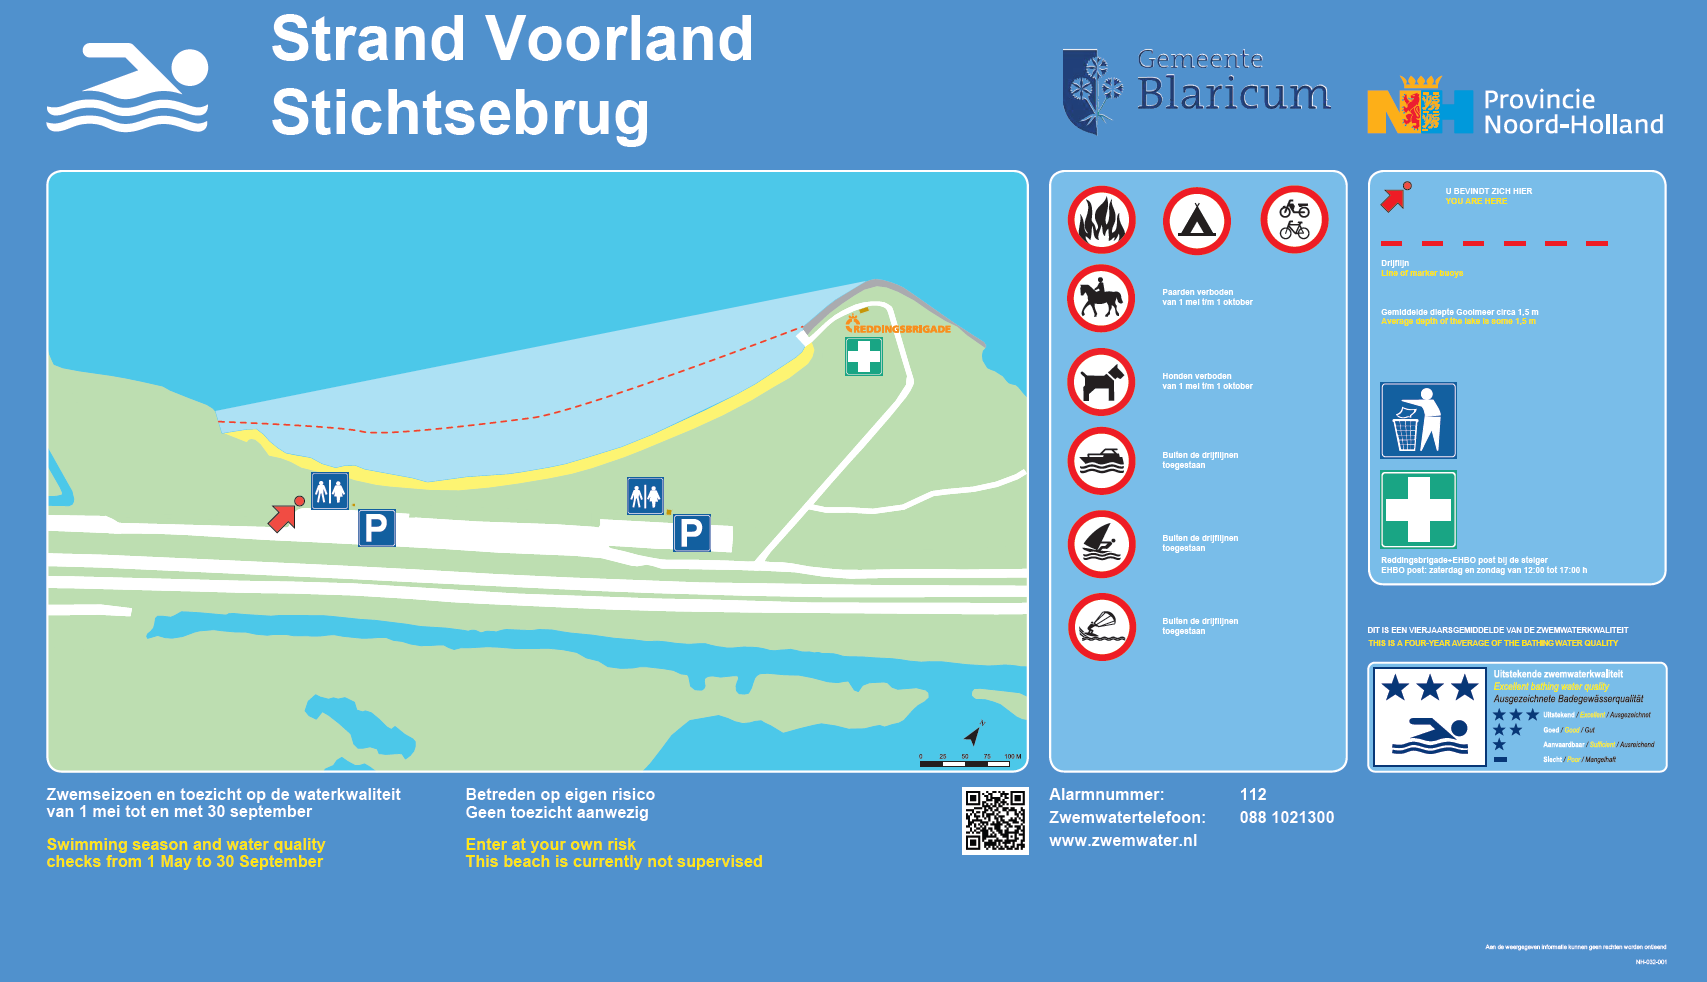 The information board at the swimming location Strand Voorland Stichtsebrug